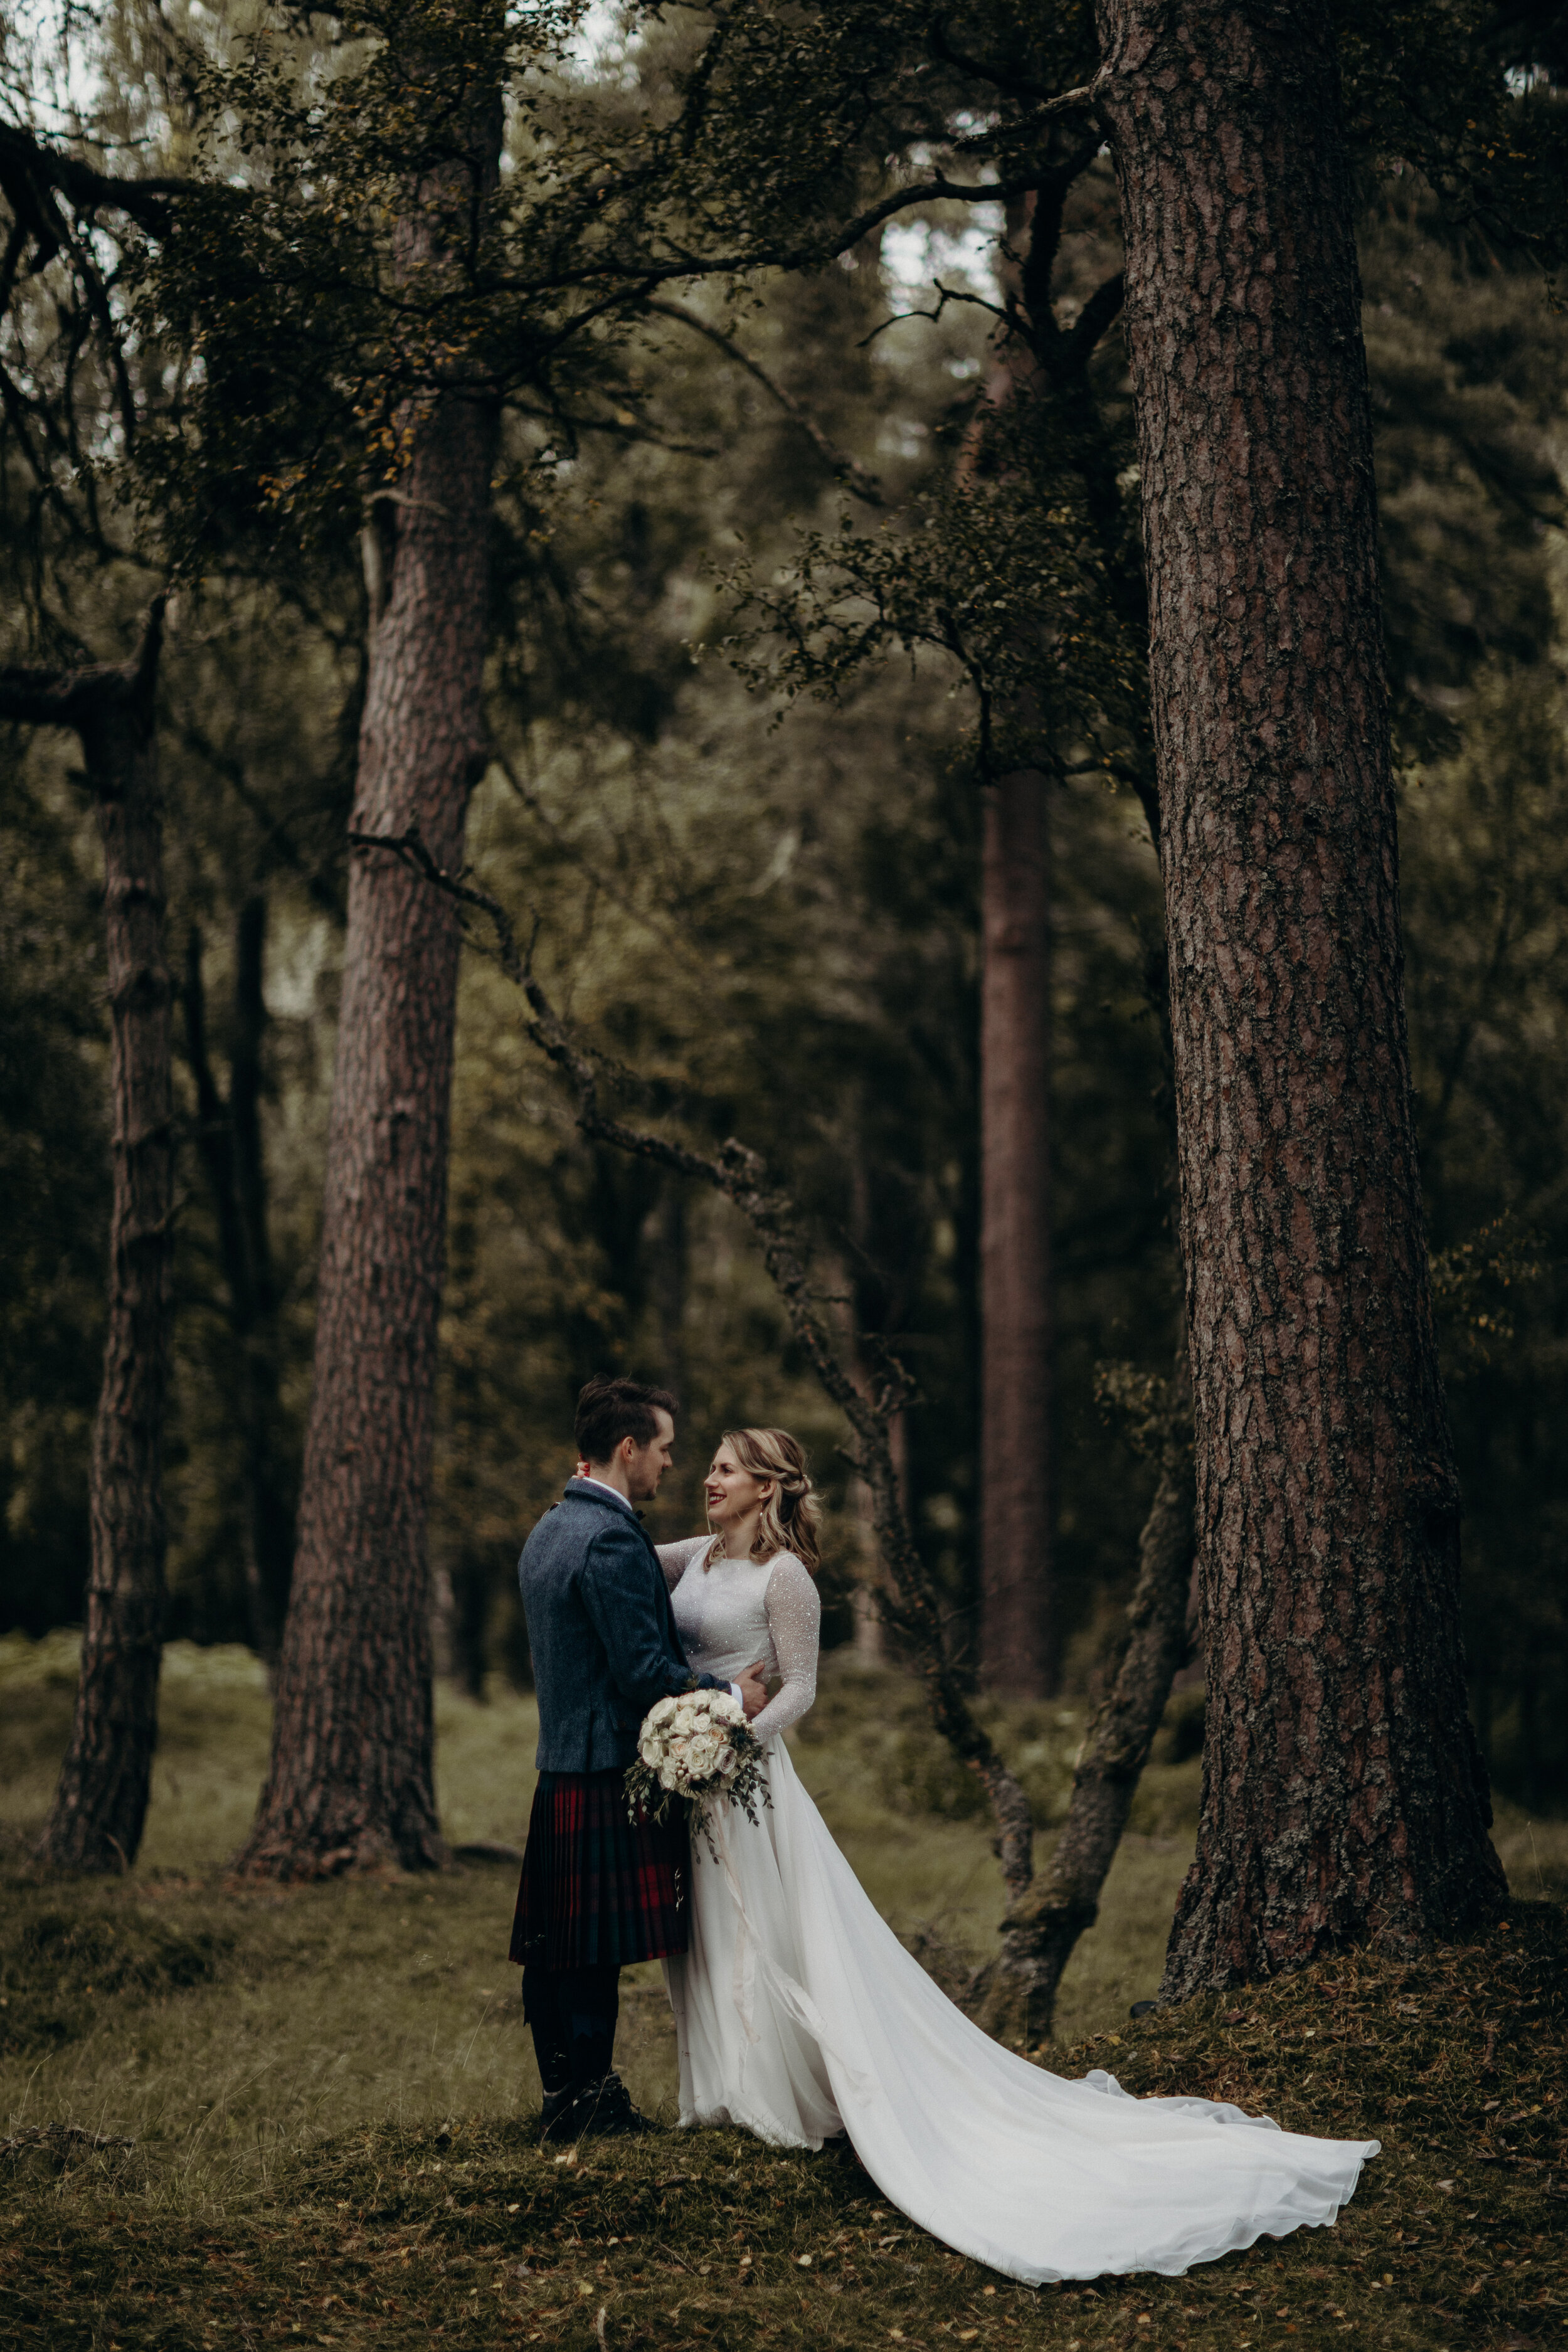 Bride and Groom standing in forest in Dunkled, Perthshire